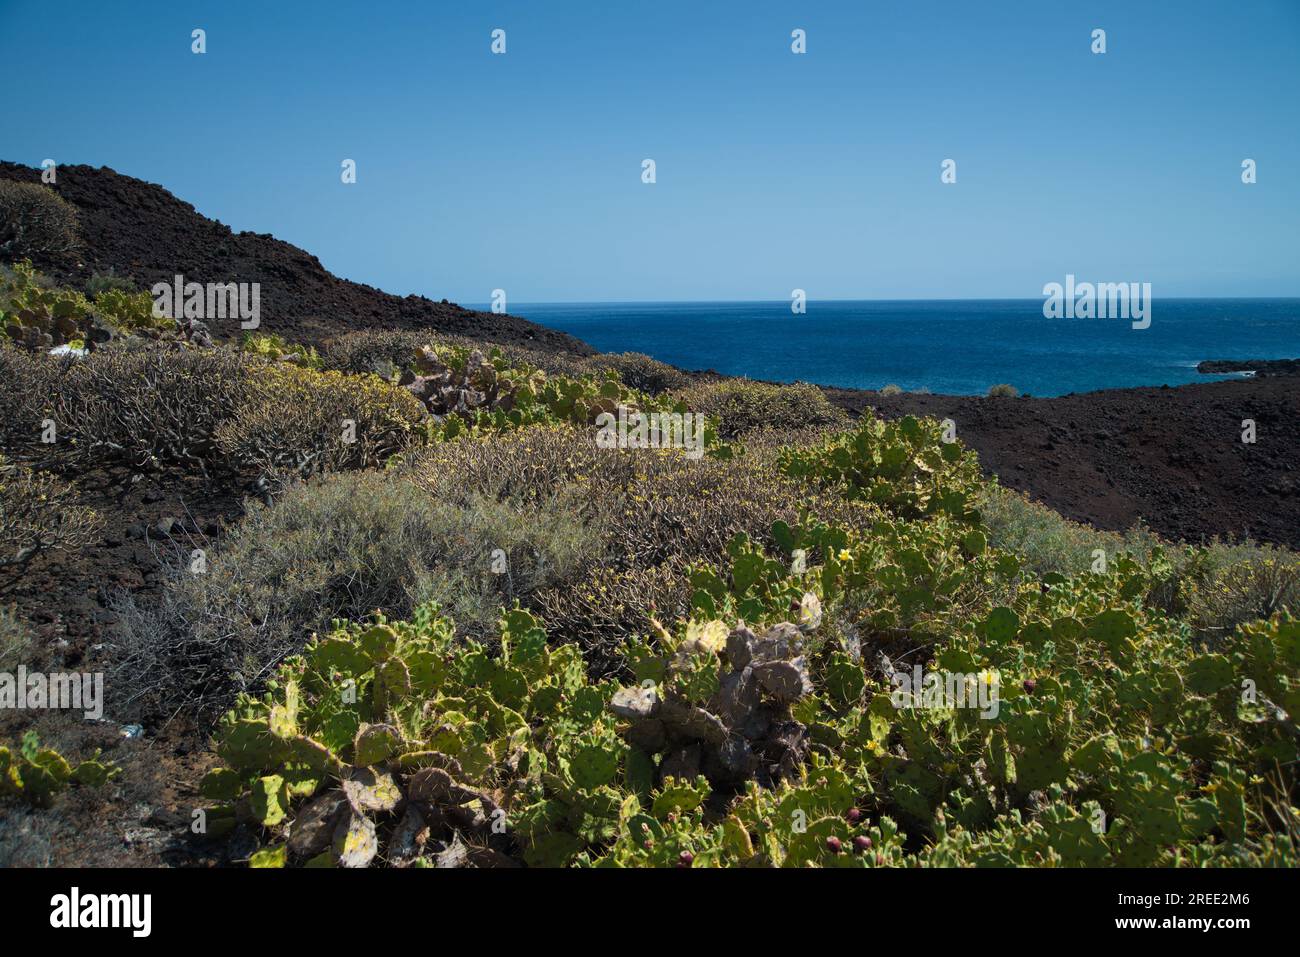 Geology and typical flora of Punta de Teno on the island of Tenerife. Geología y flora típica de Punta de Teno en la isla de Tenerife, Islas Canarias. Stock Photo